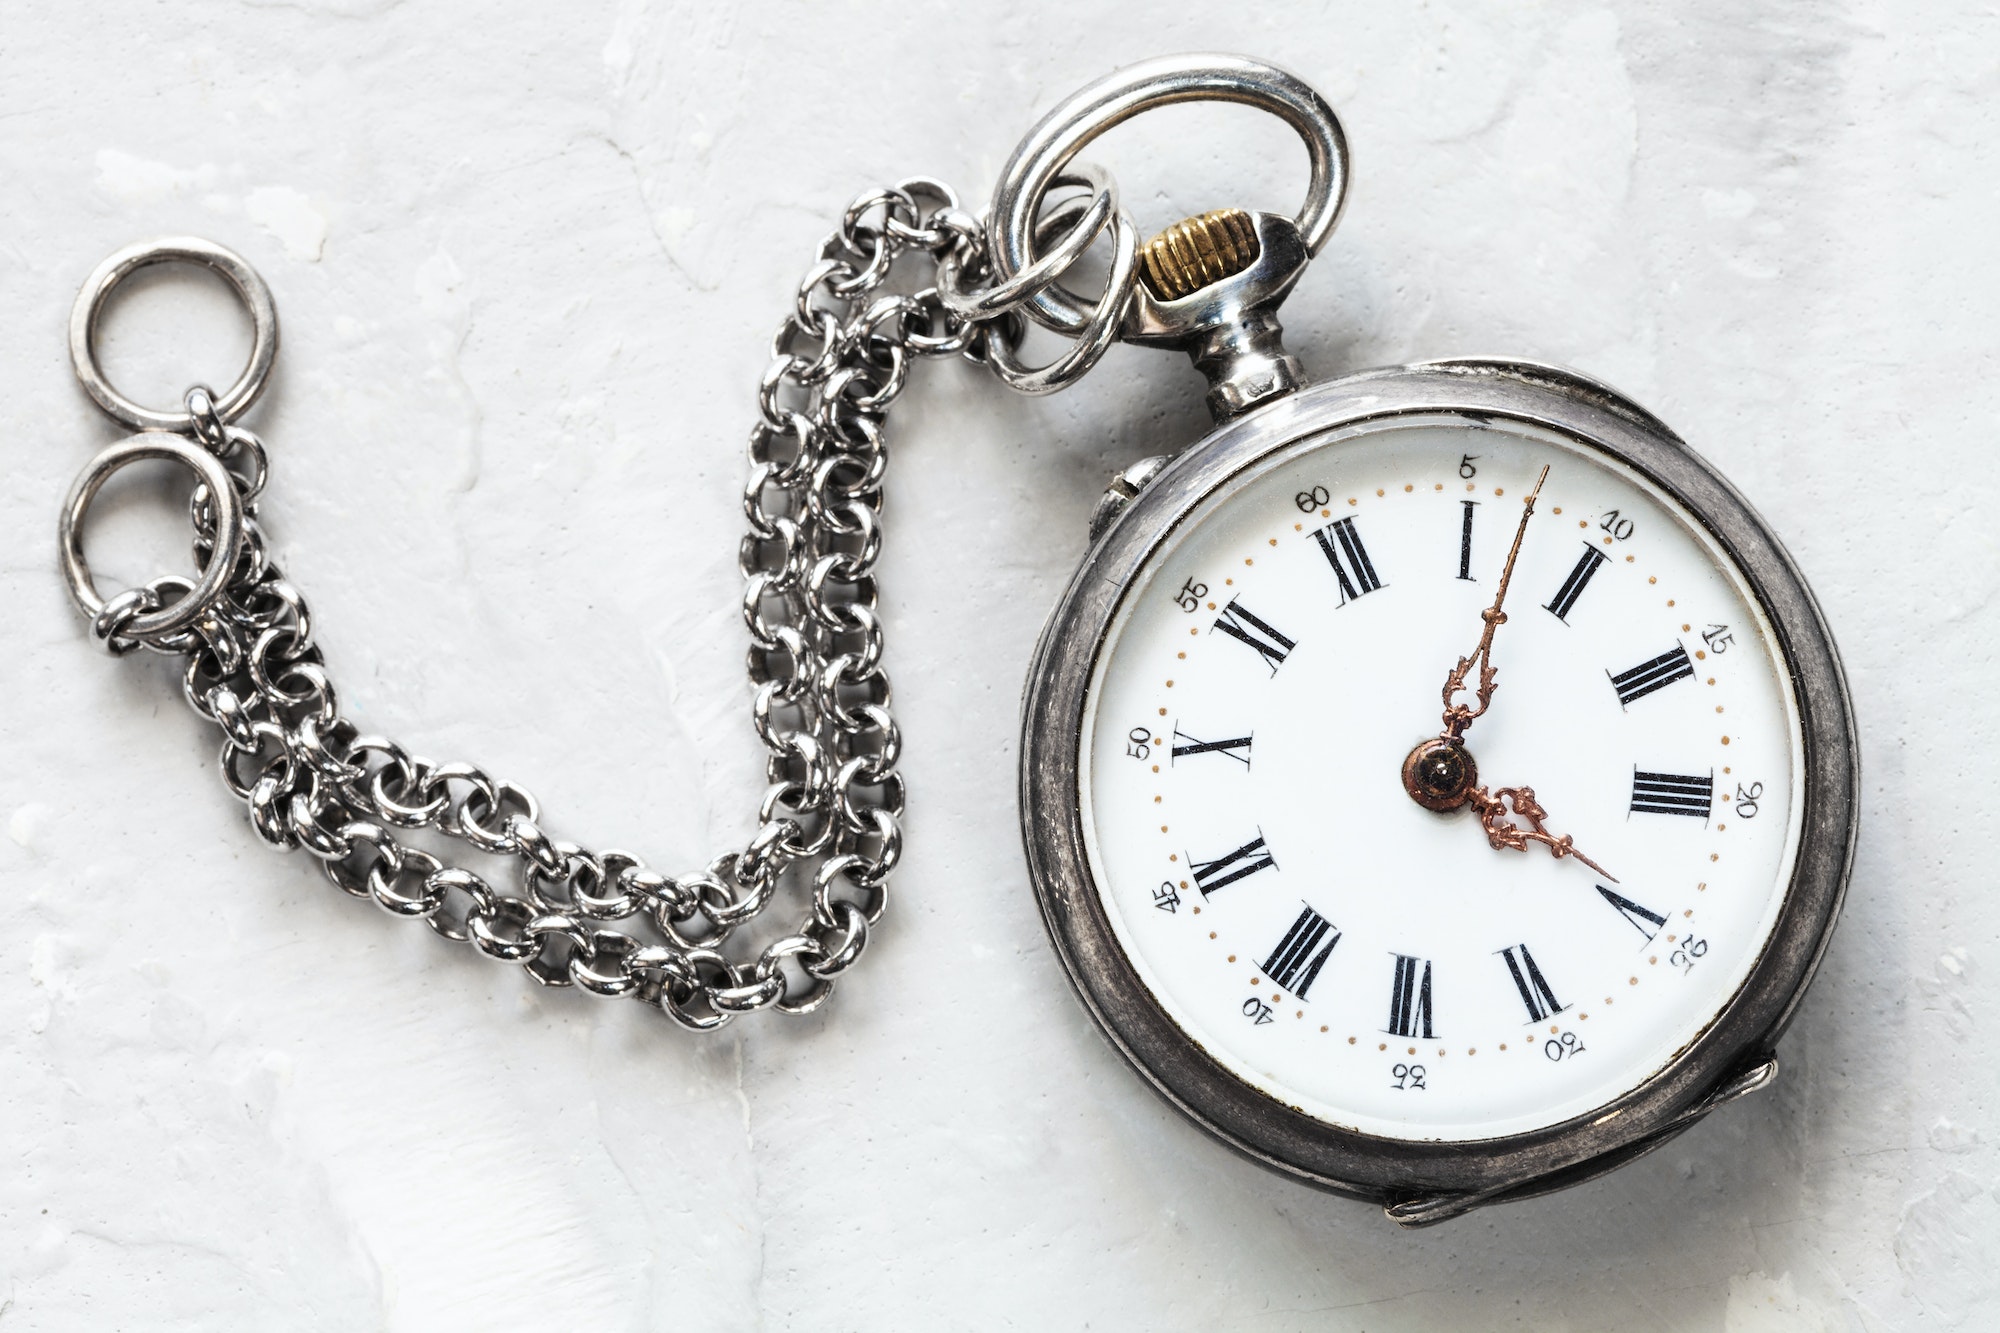 retro pocket watch with chain on white plaster